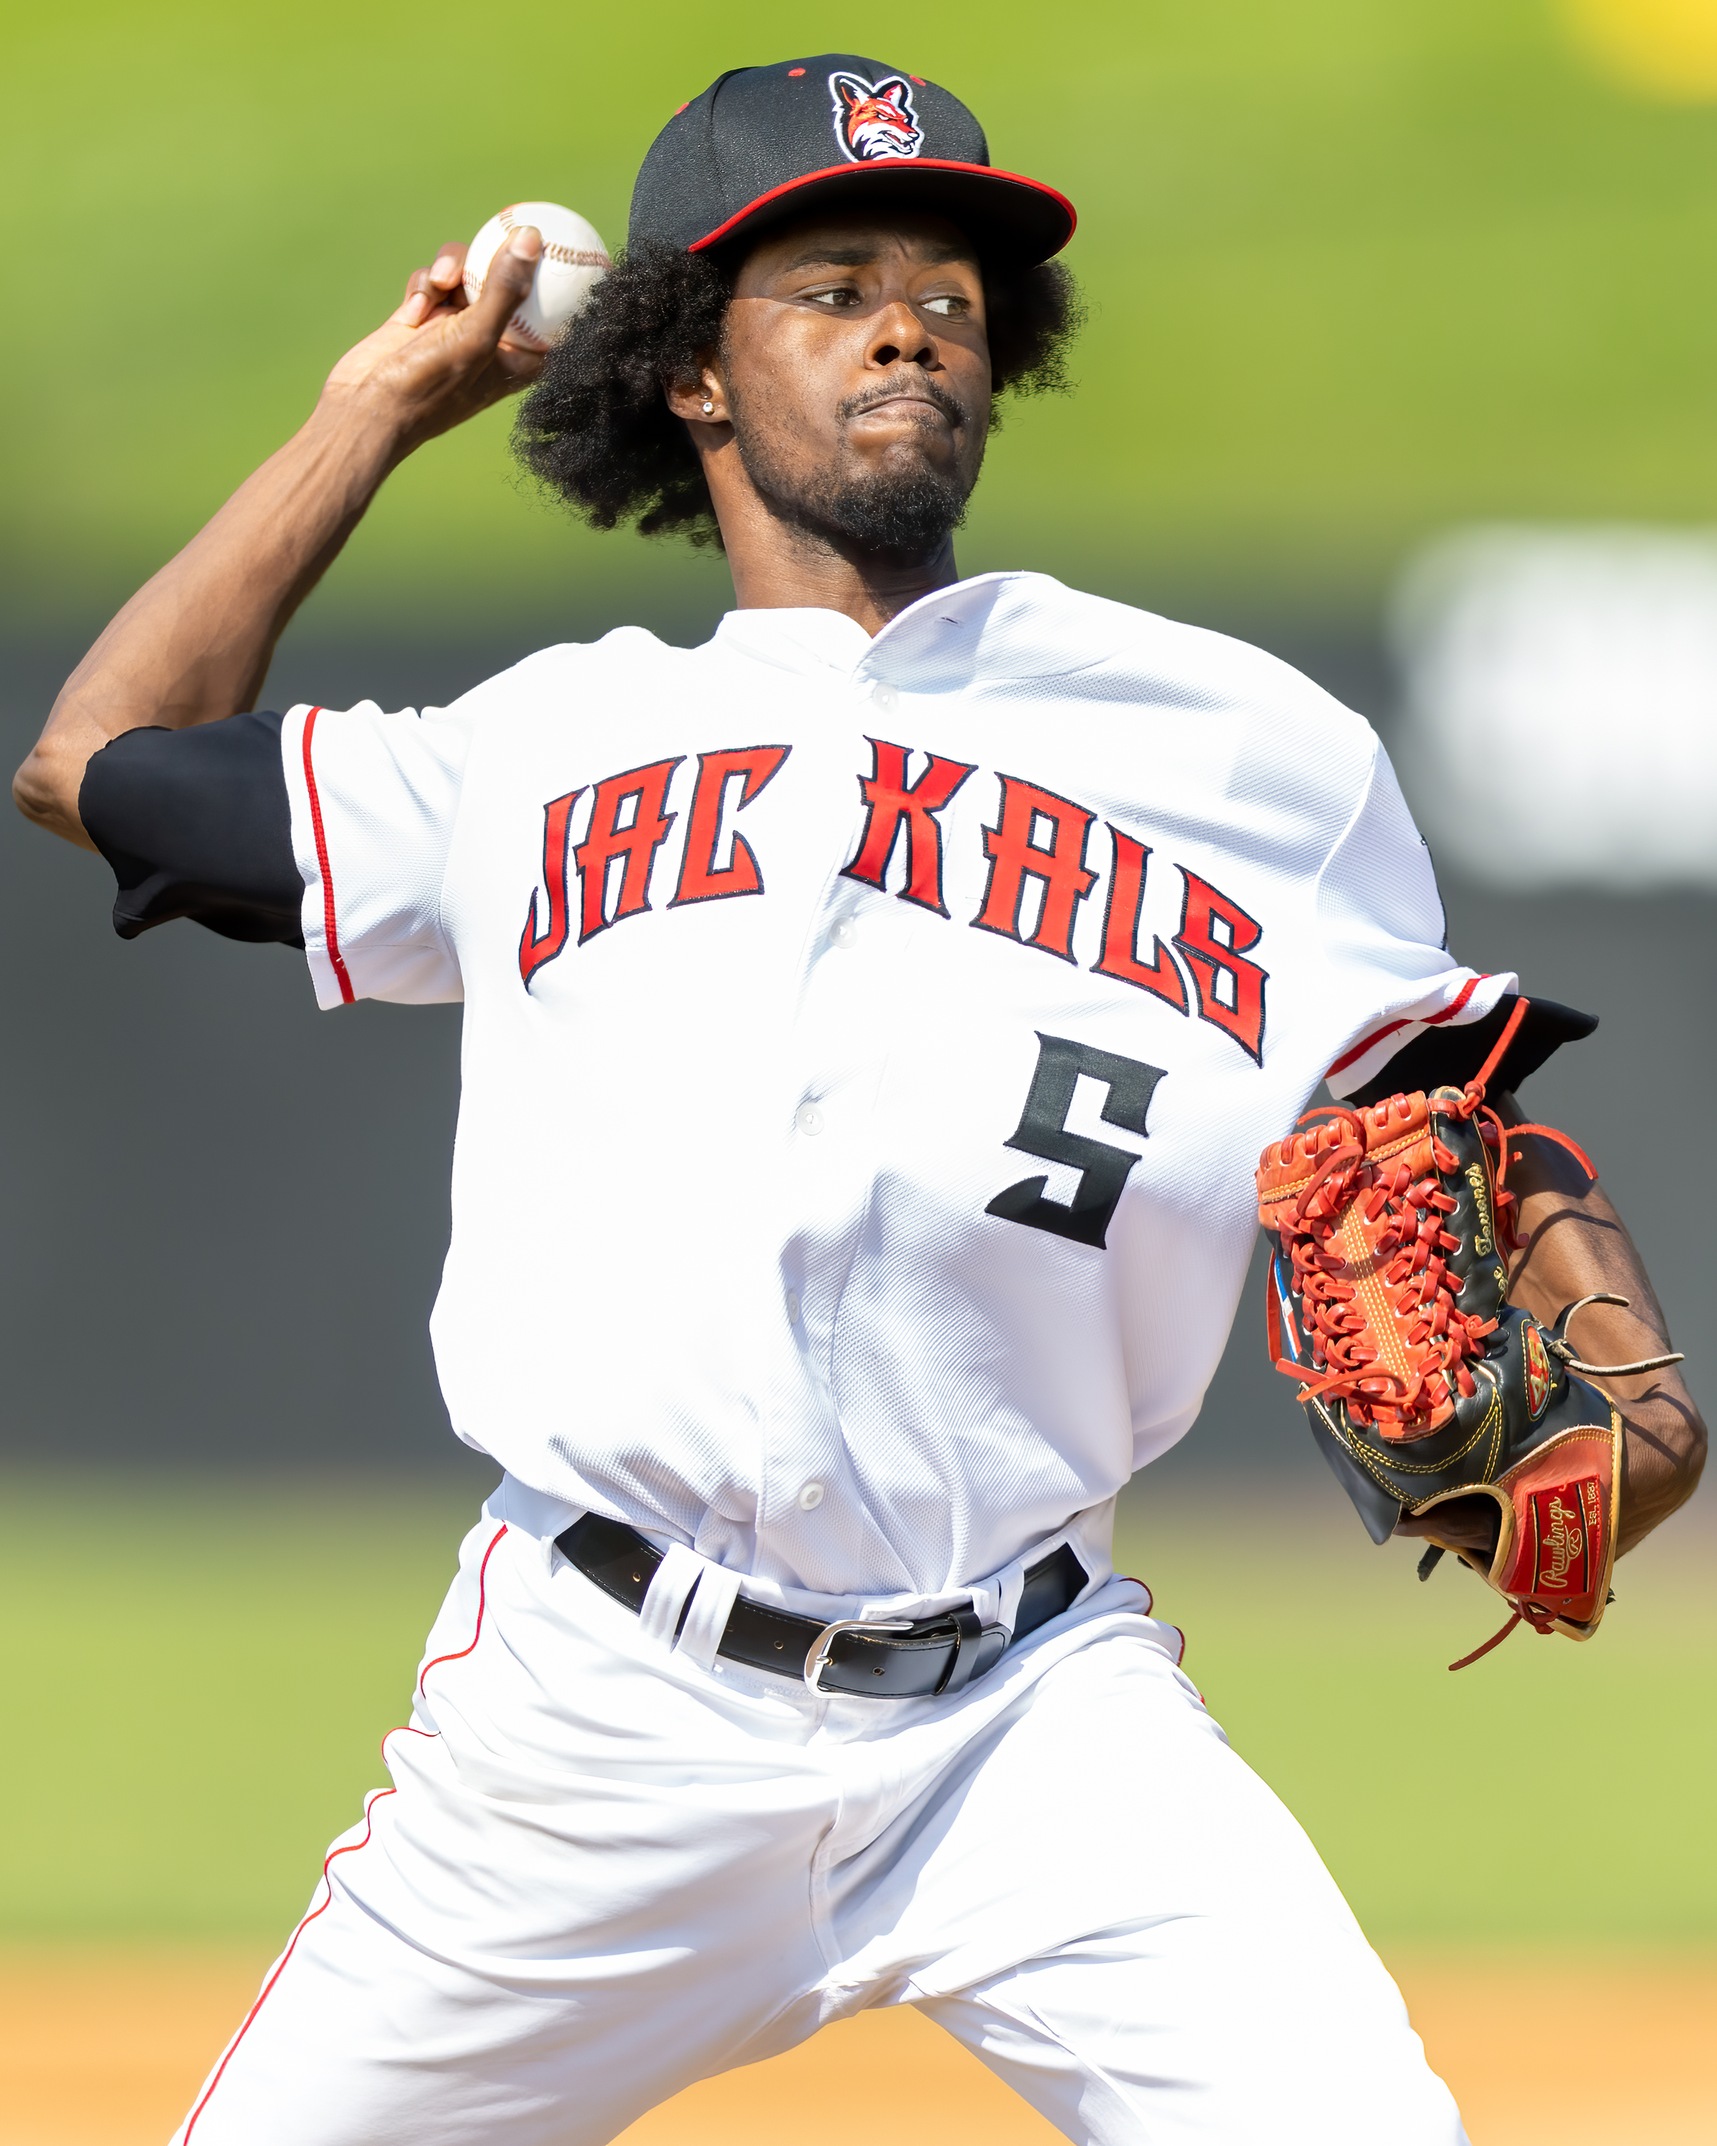 NO-HITTER FOR NEW JERSEY JACKAL JORGE TAVAREZ IN DEFEAT AGAINST MINERS